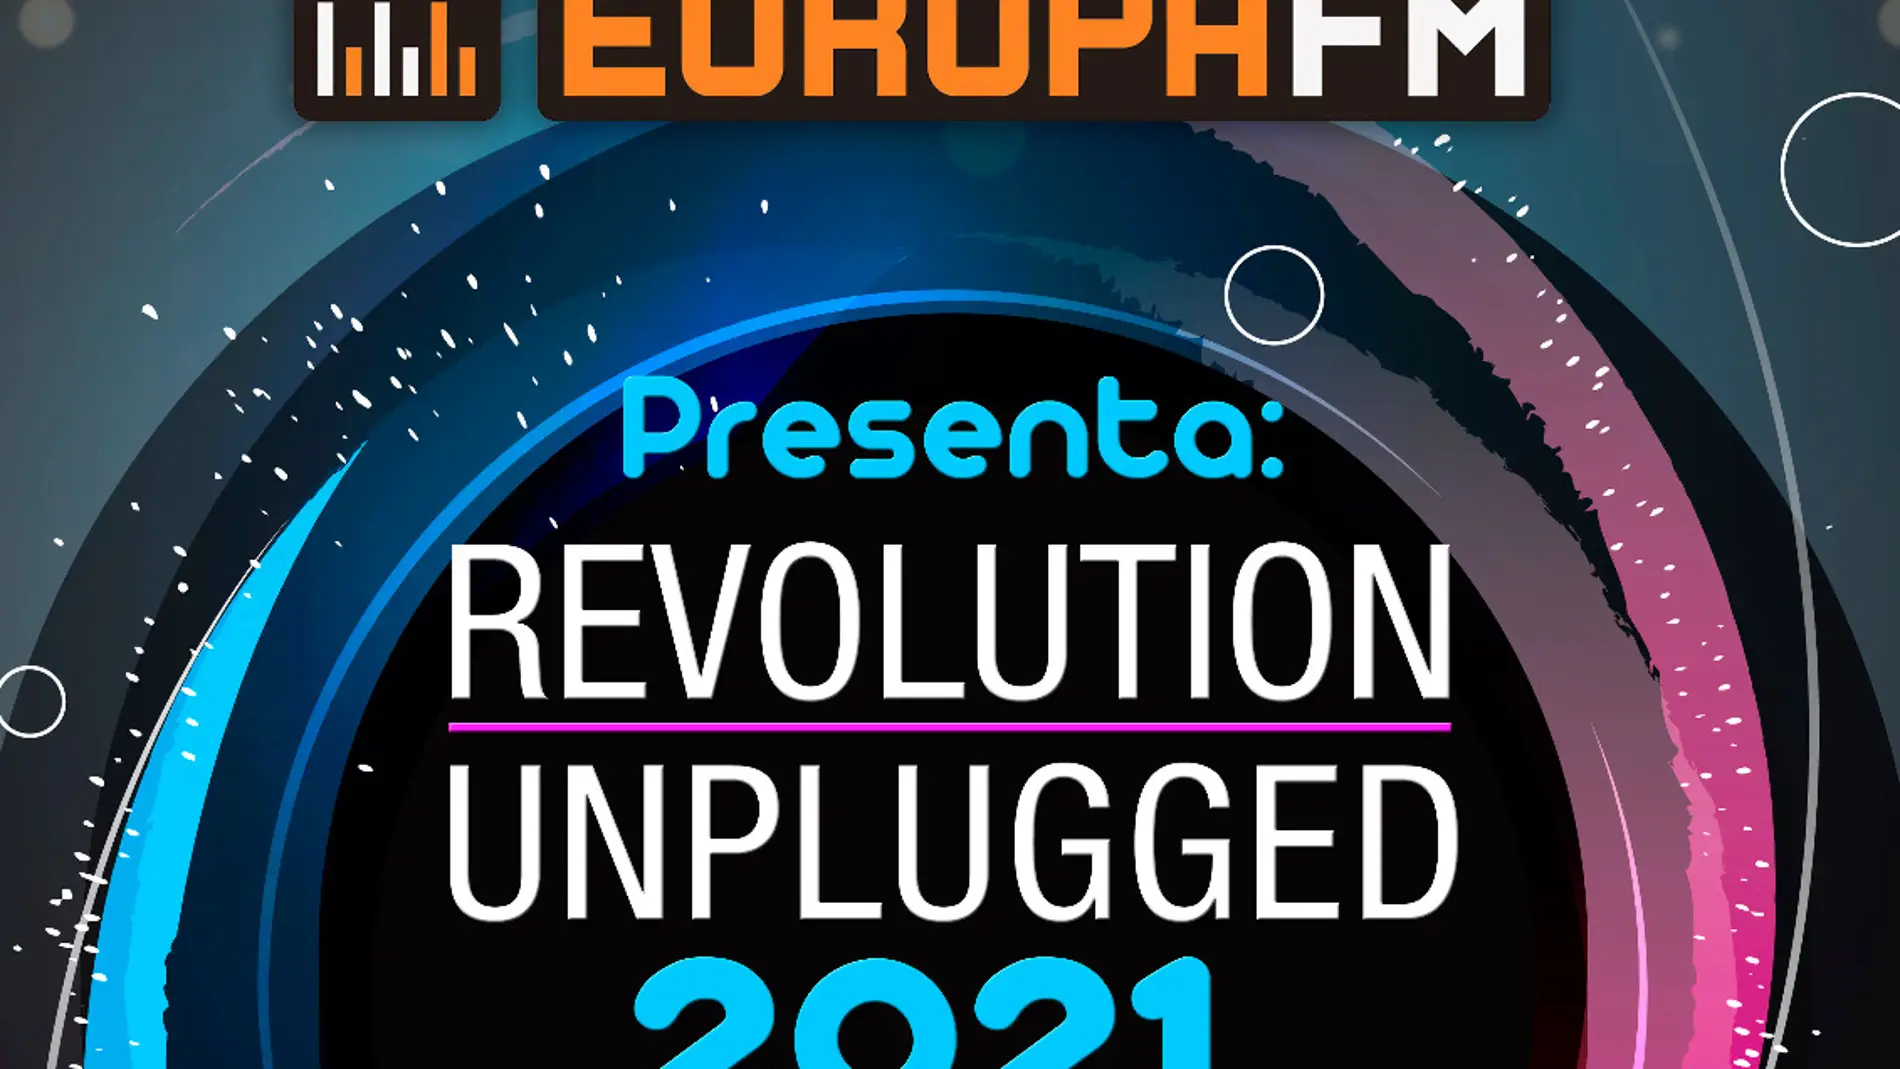 REVOLUTION UNPLUGGED 2021 by EUROPA FM